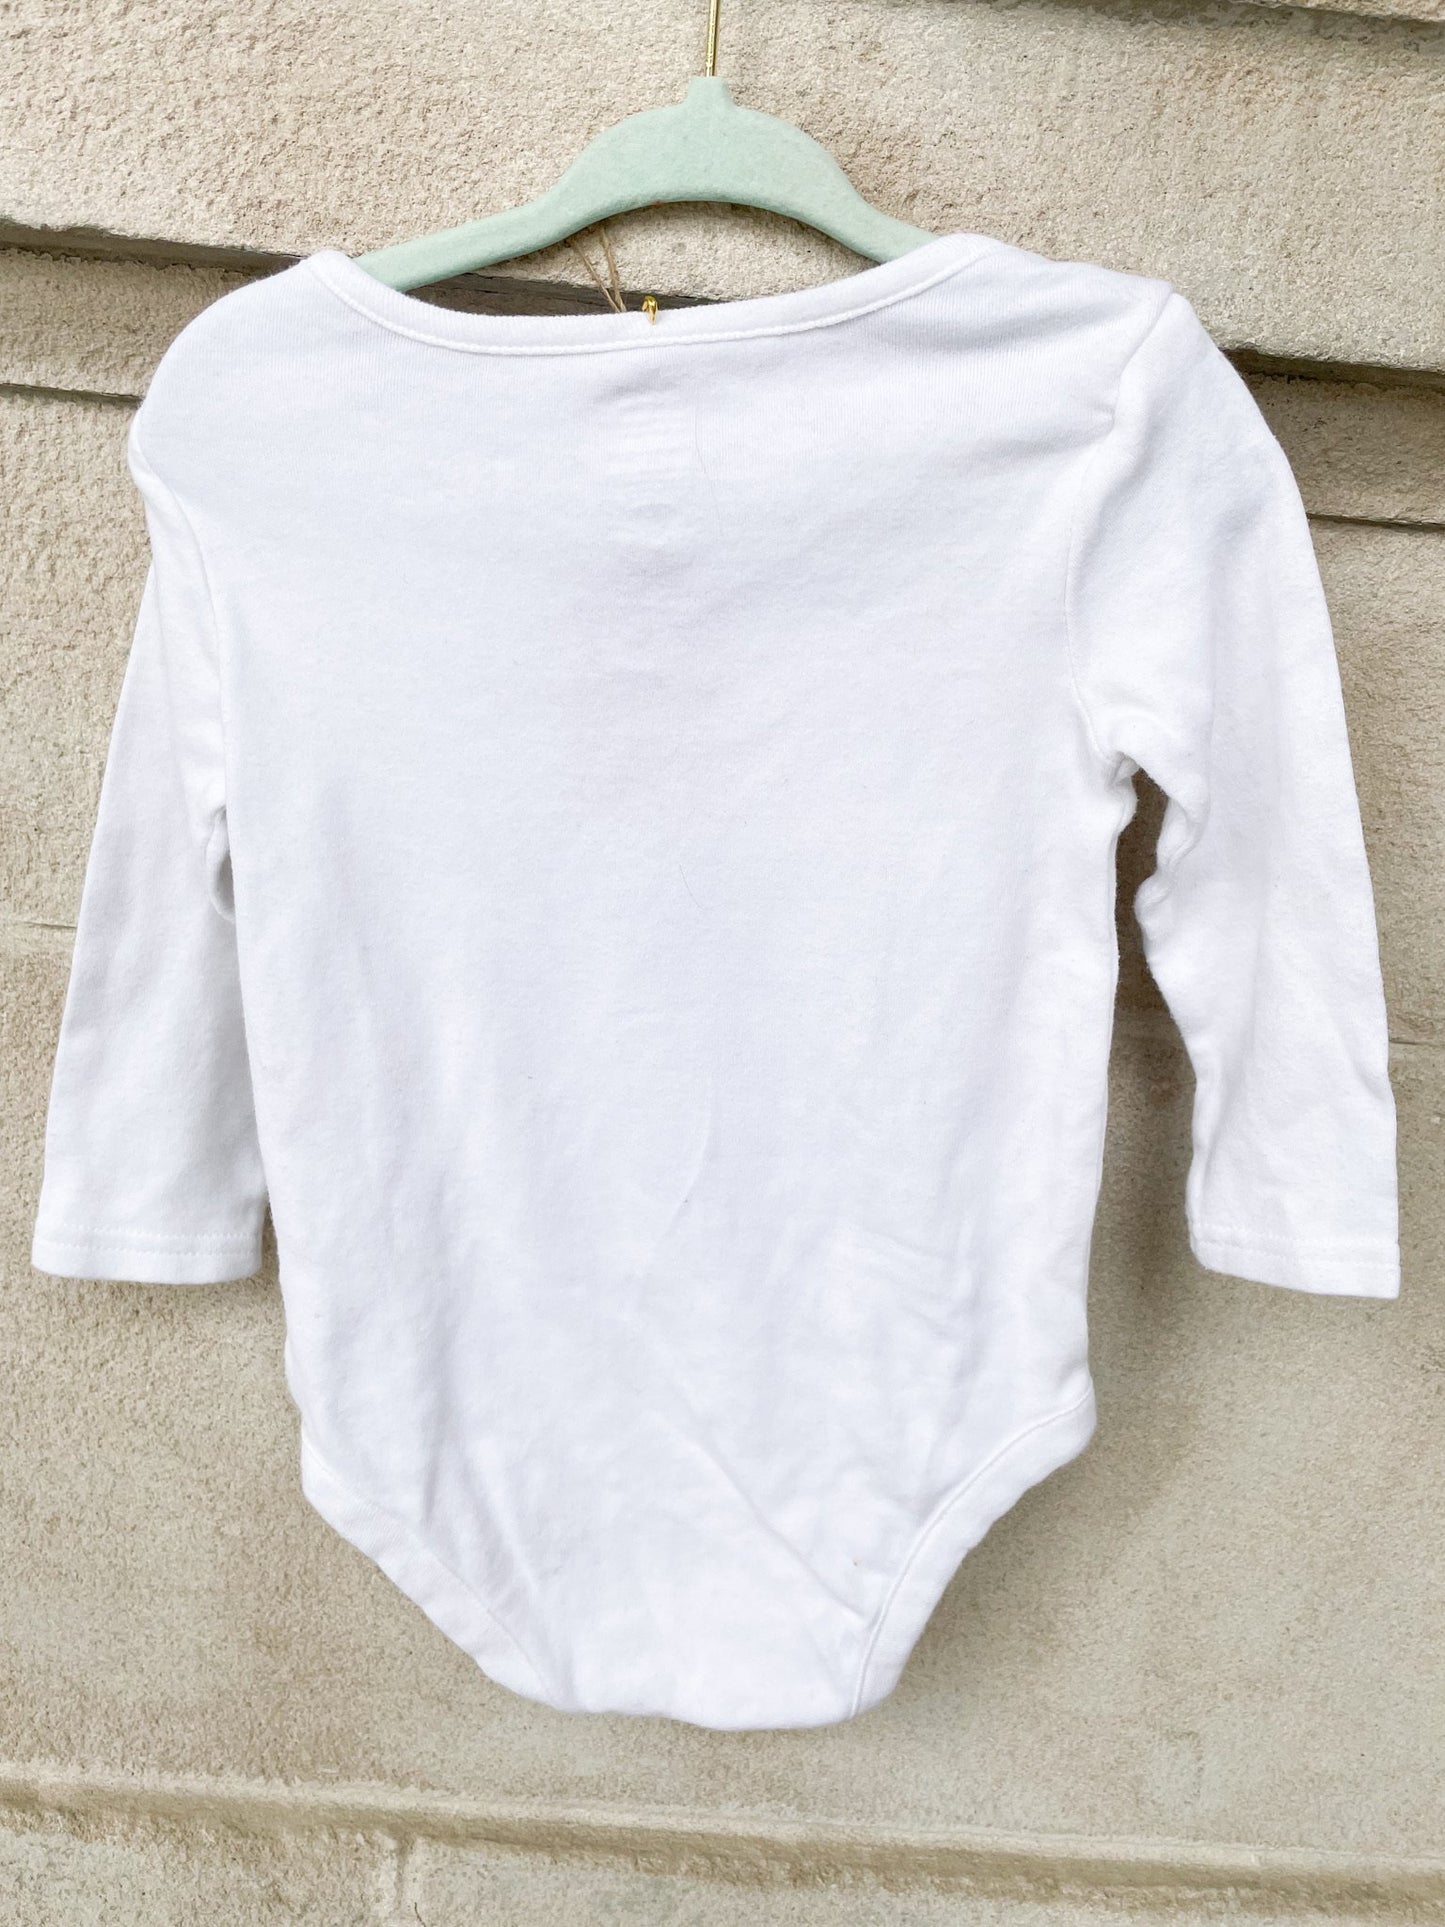 White Merry Christmas Upcycled Long Sleeve Baby Bodysuit - 12-18 Months